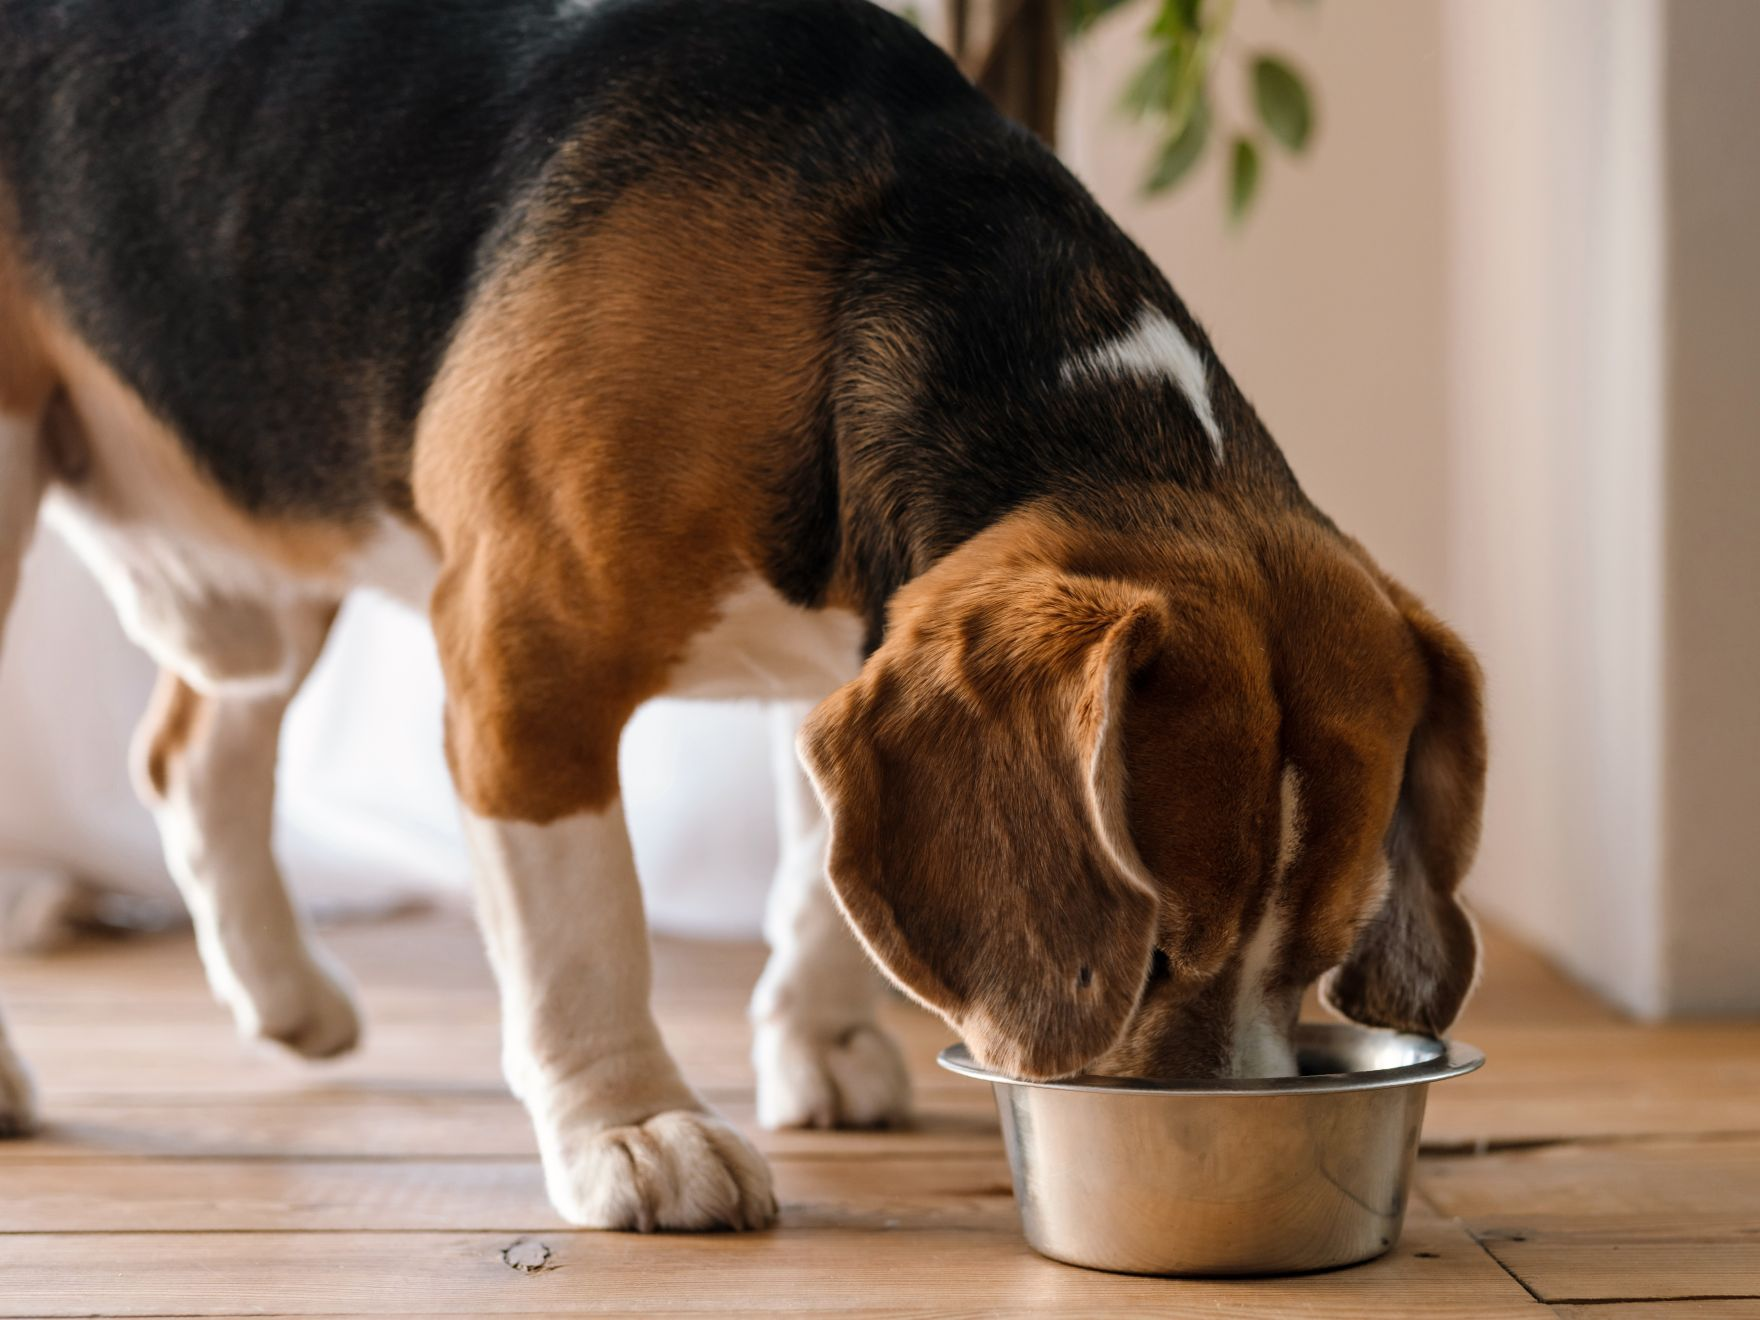 Brown and black dog eating from a bowl 